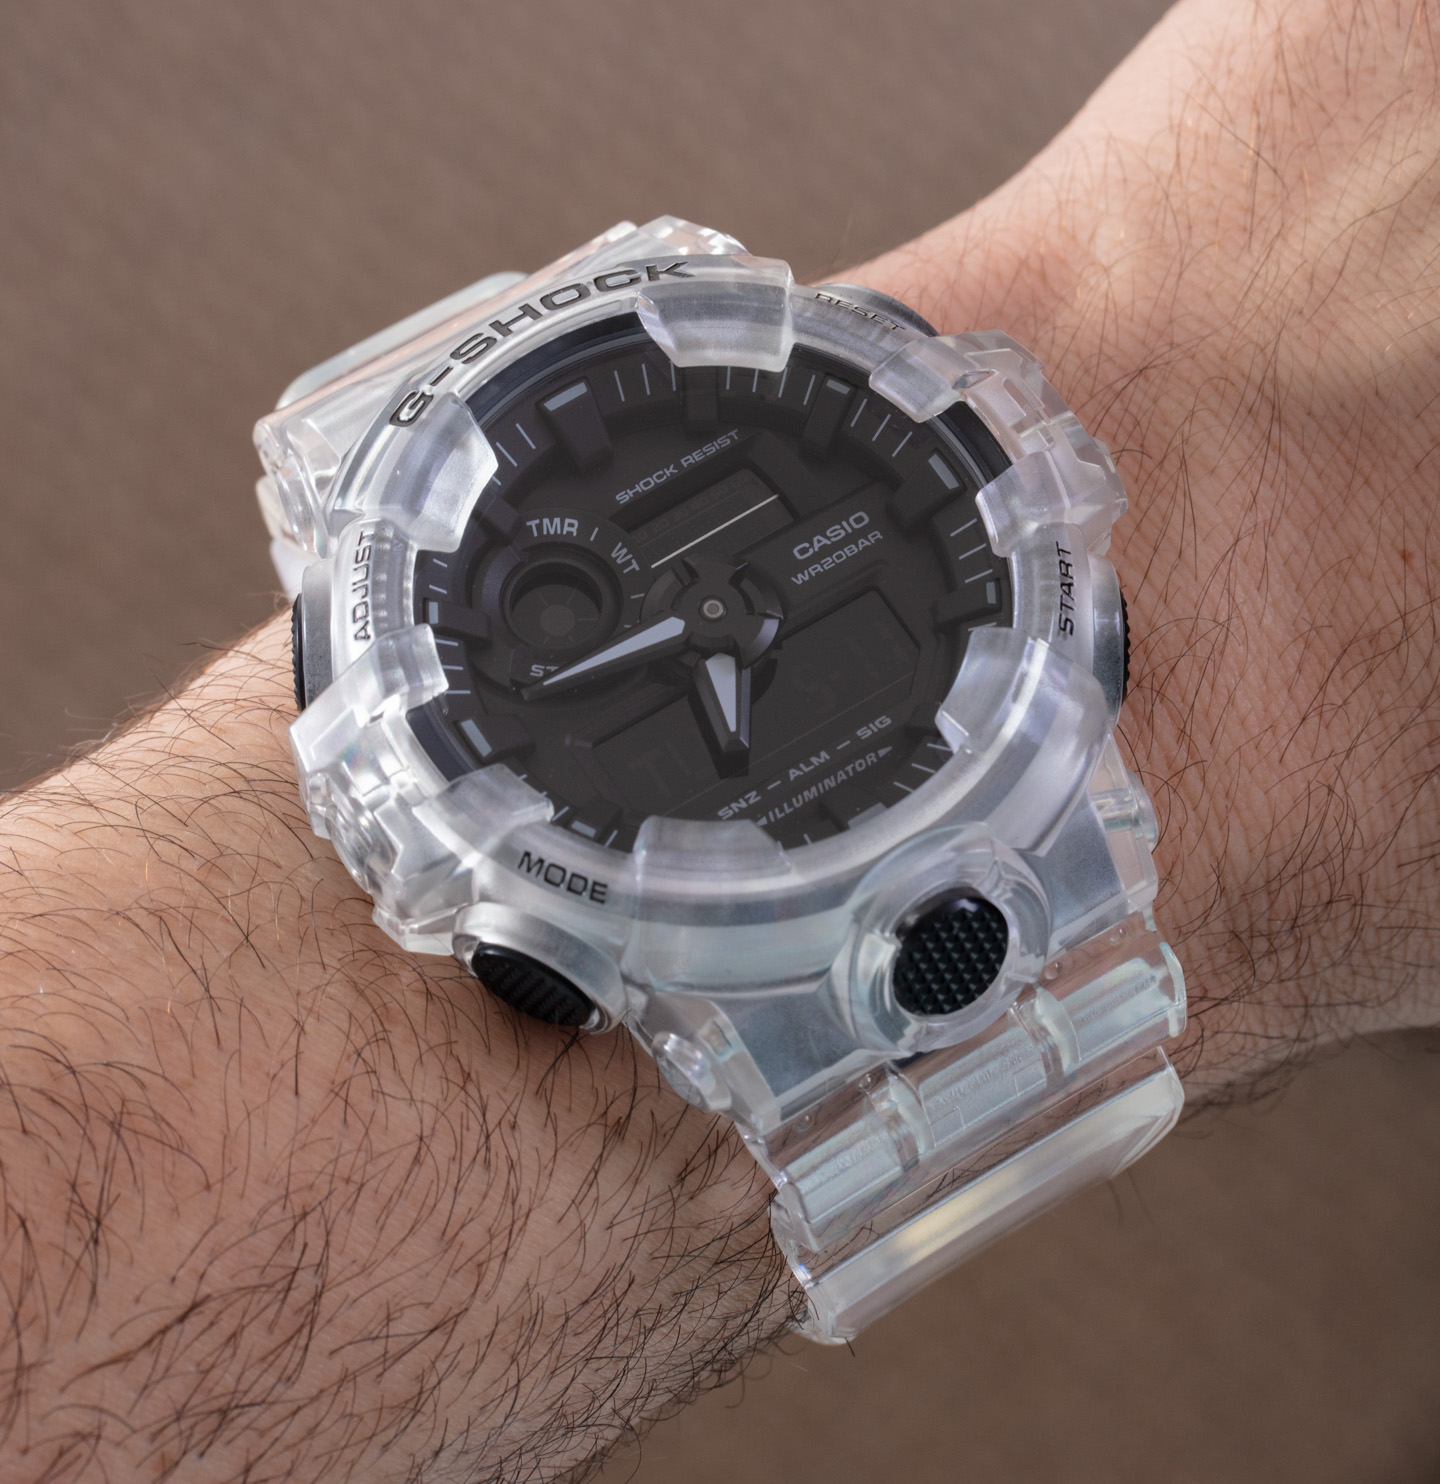 From The Casio G-Shock Transparent Pack: Value & Fun With The